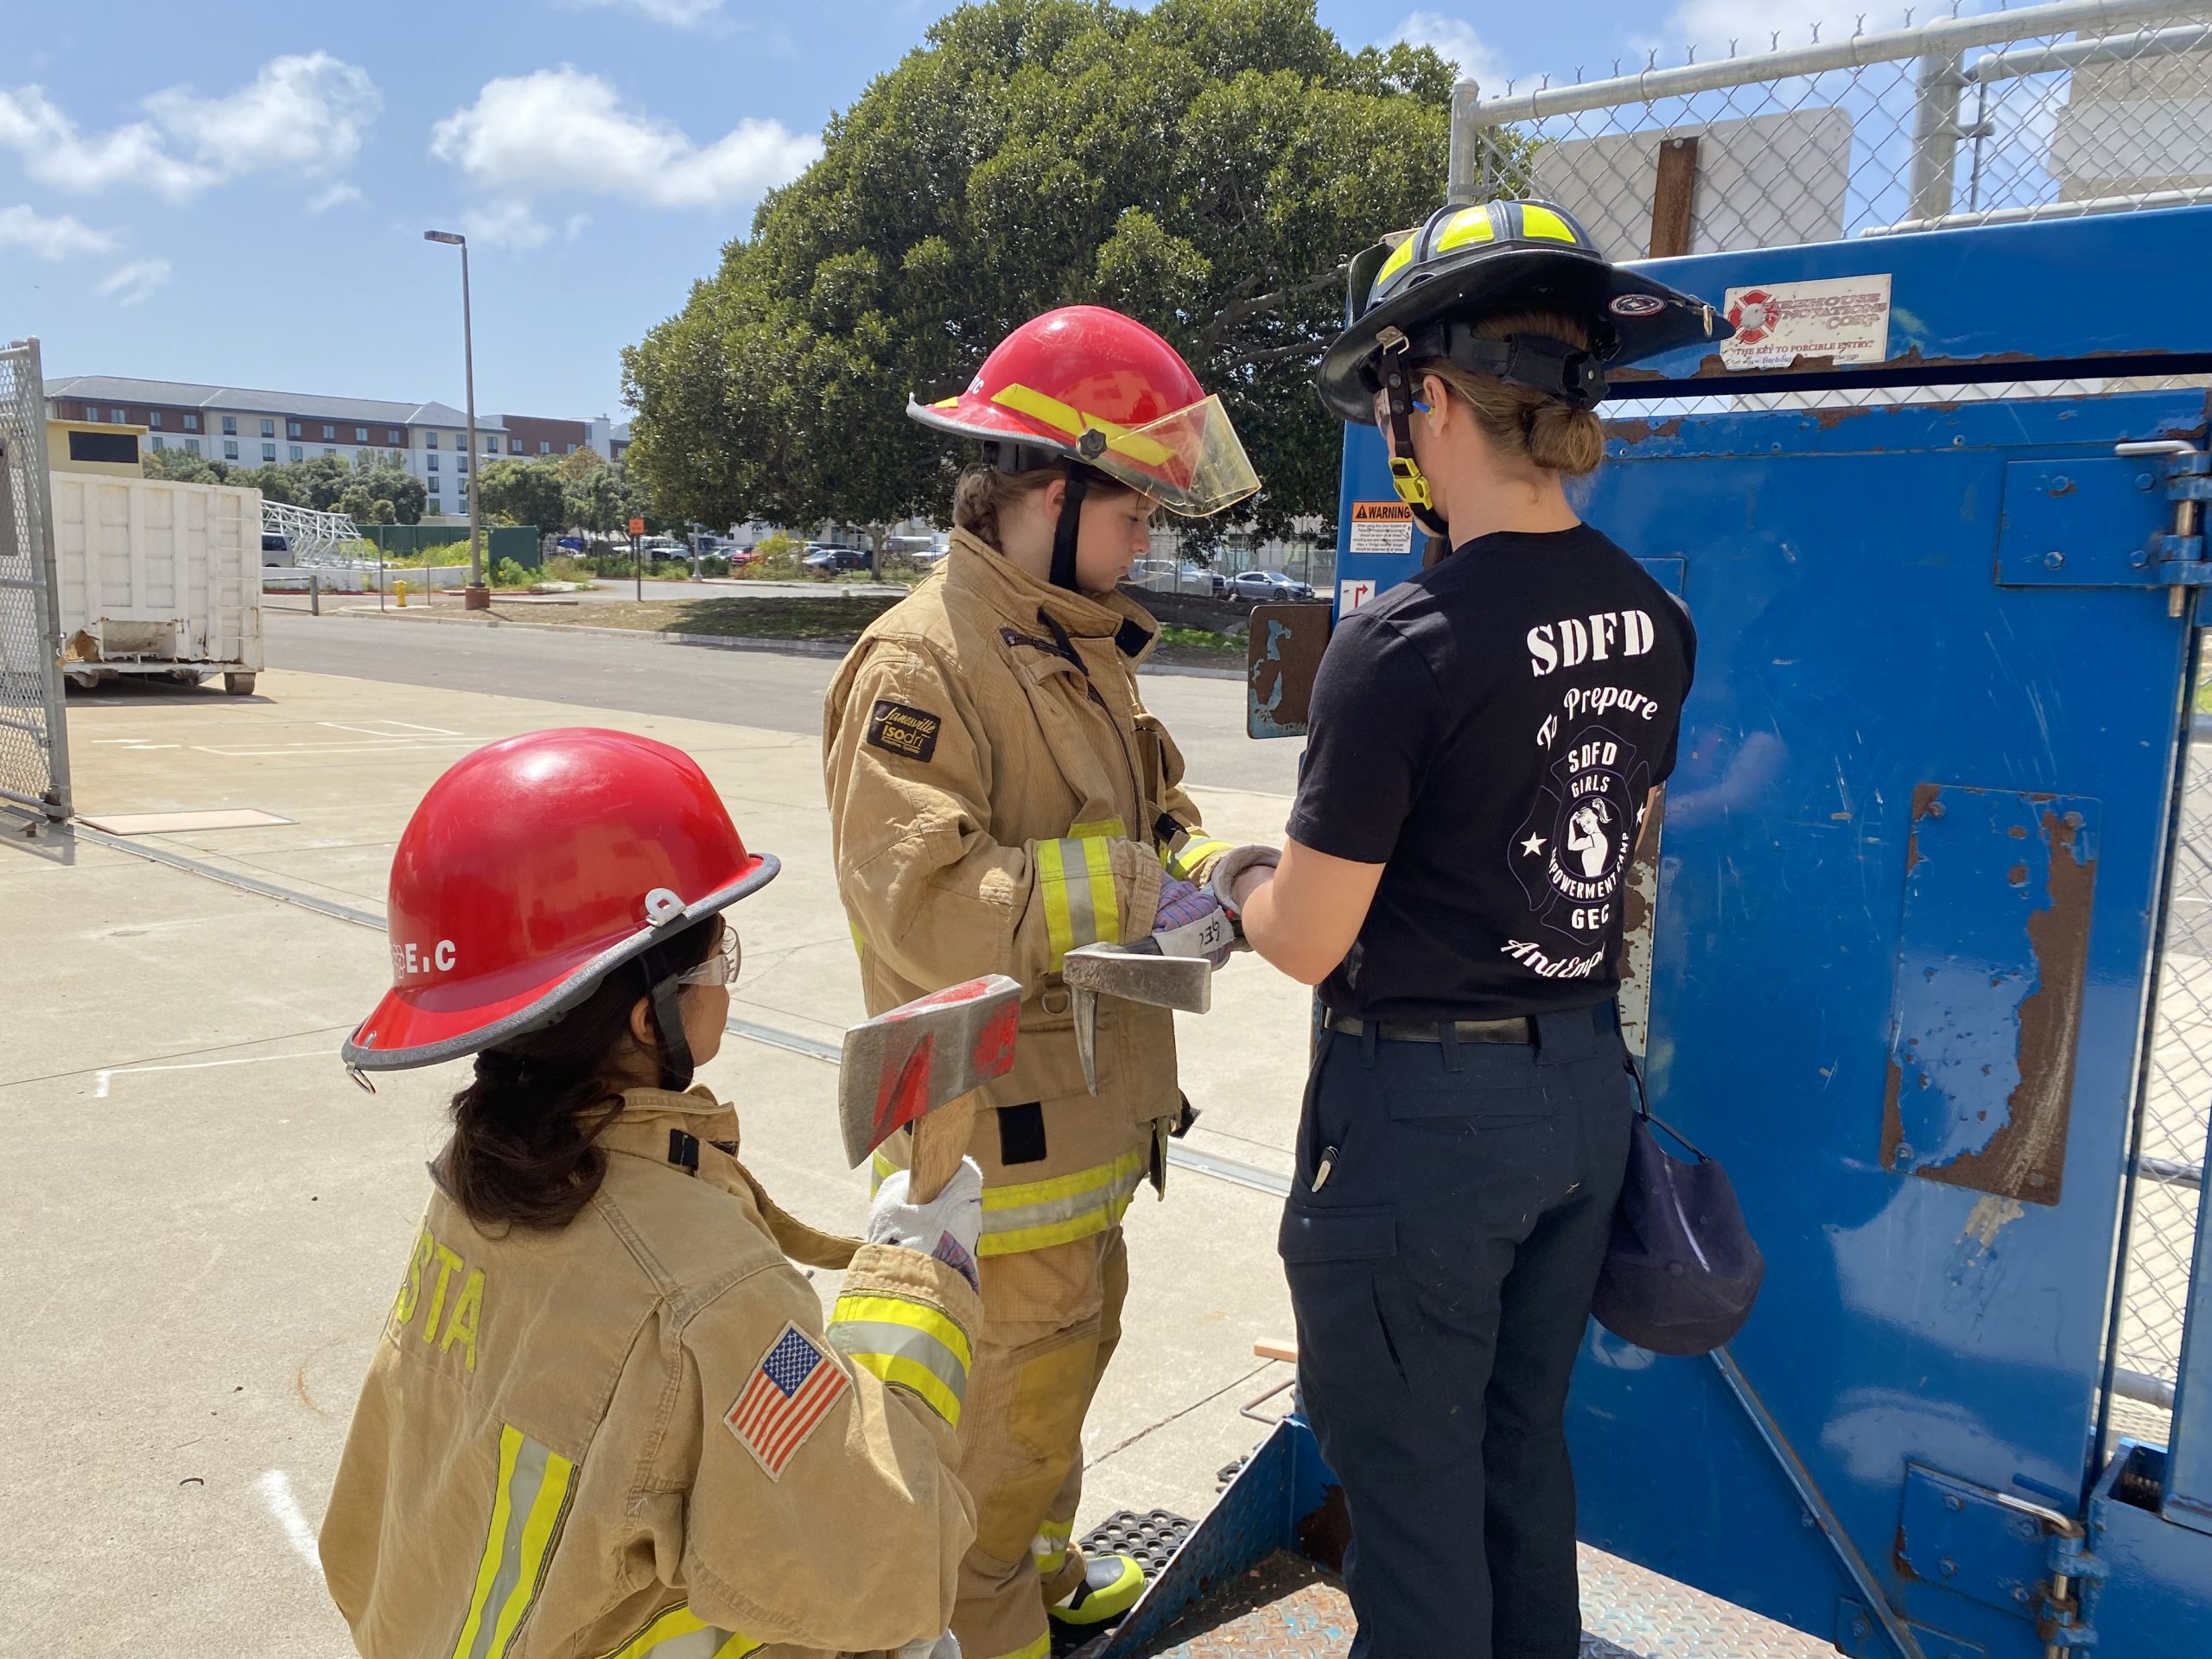 Picture of two teenage girls wearing yellow firefighter turnouts standing next to a female firefighter in a black shirt and black pants. All are wearing helmets and they are practicing forcible entry drills.